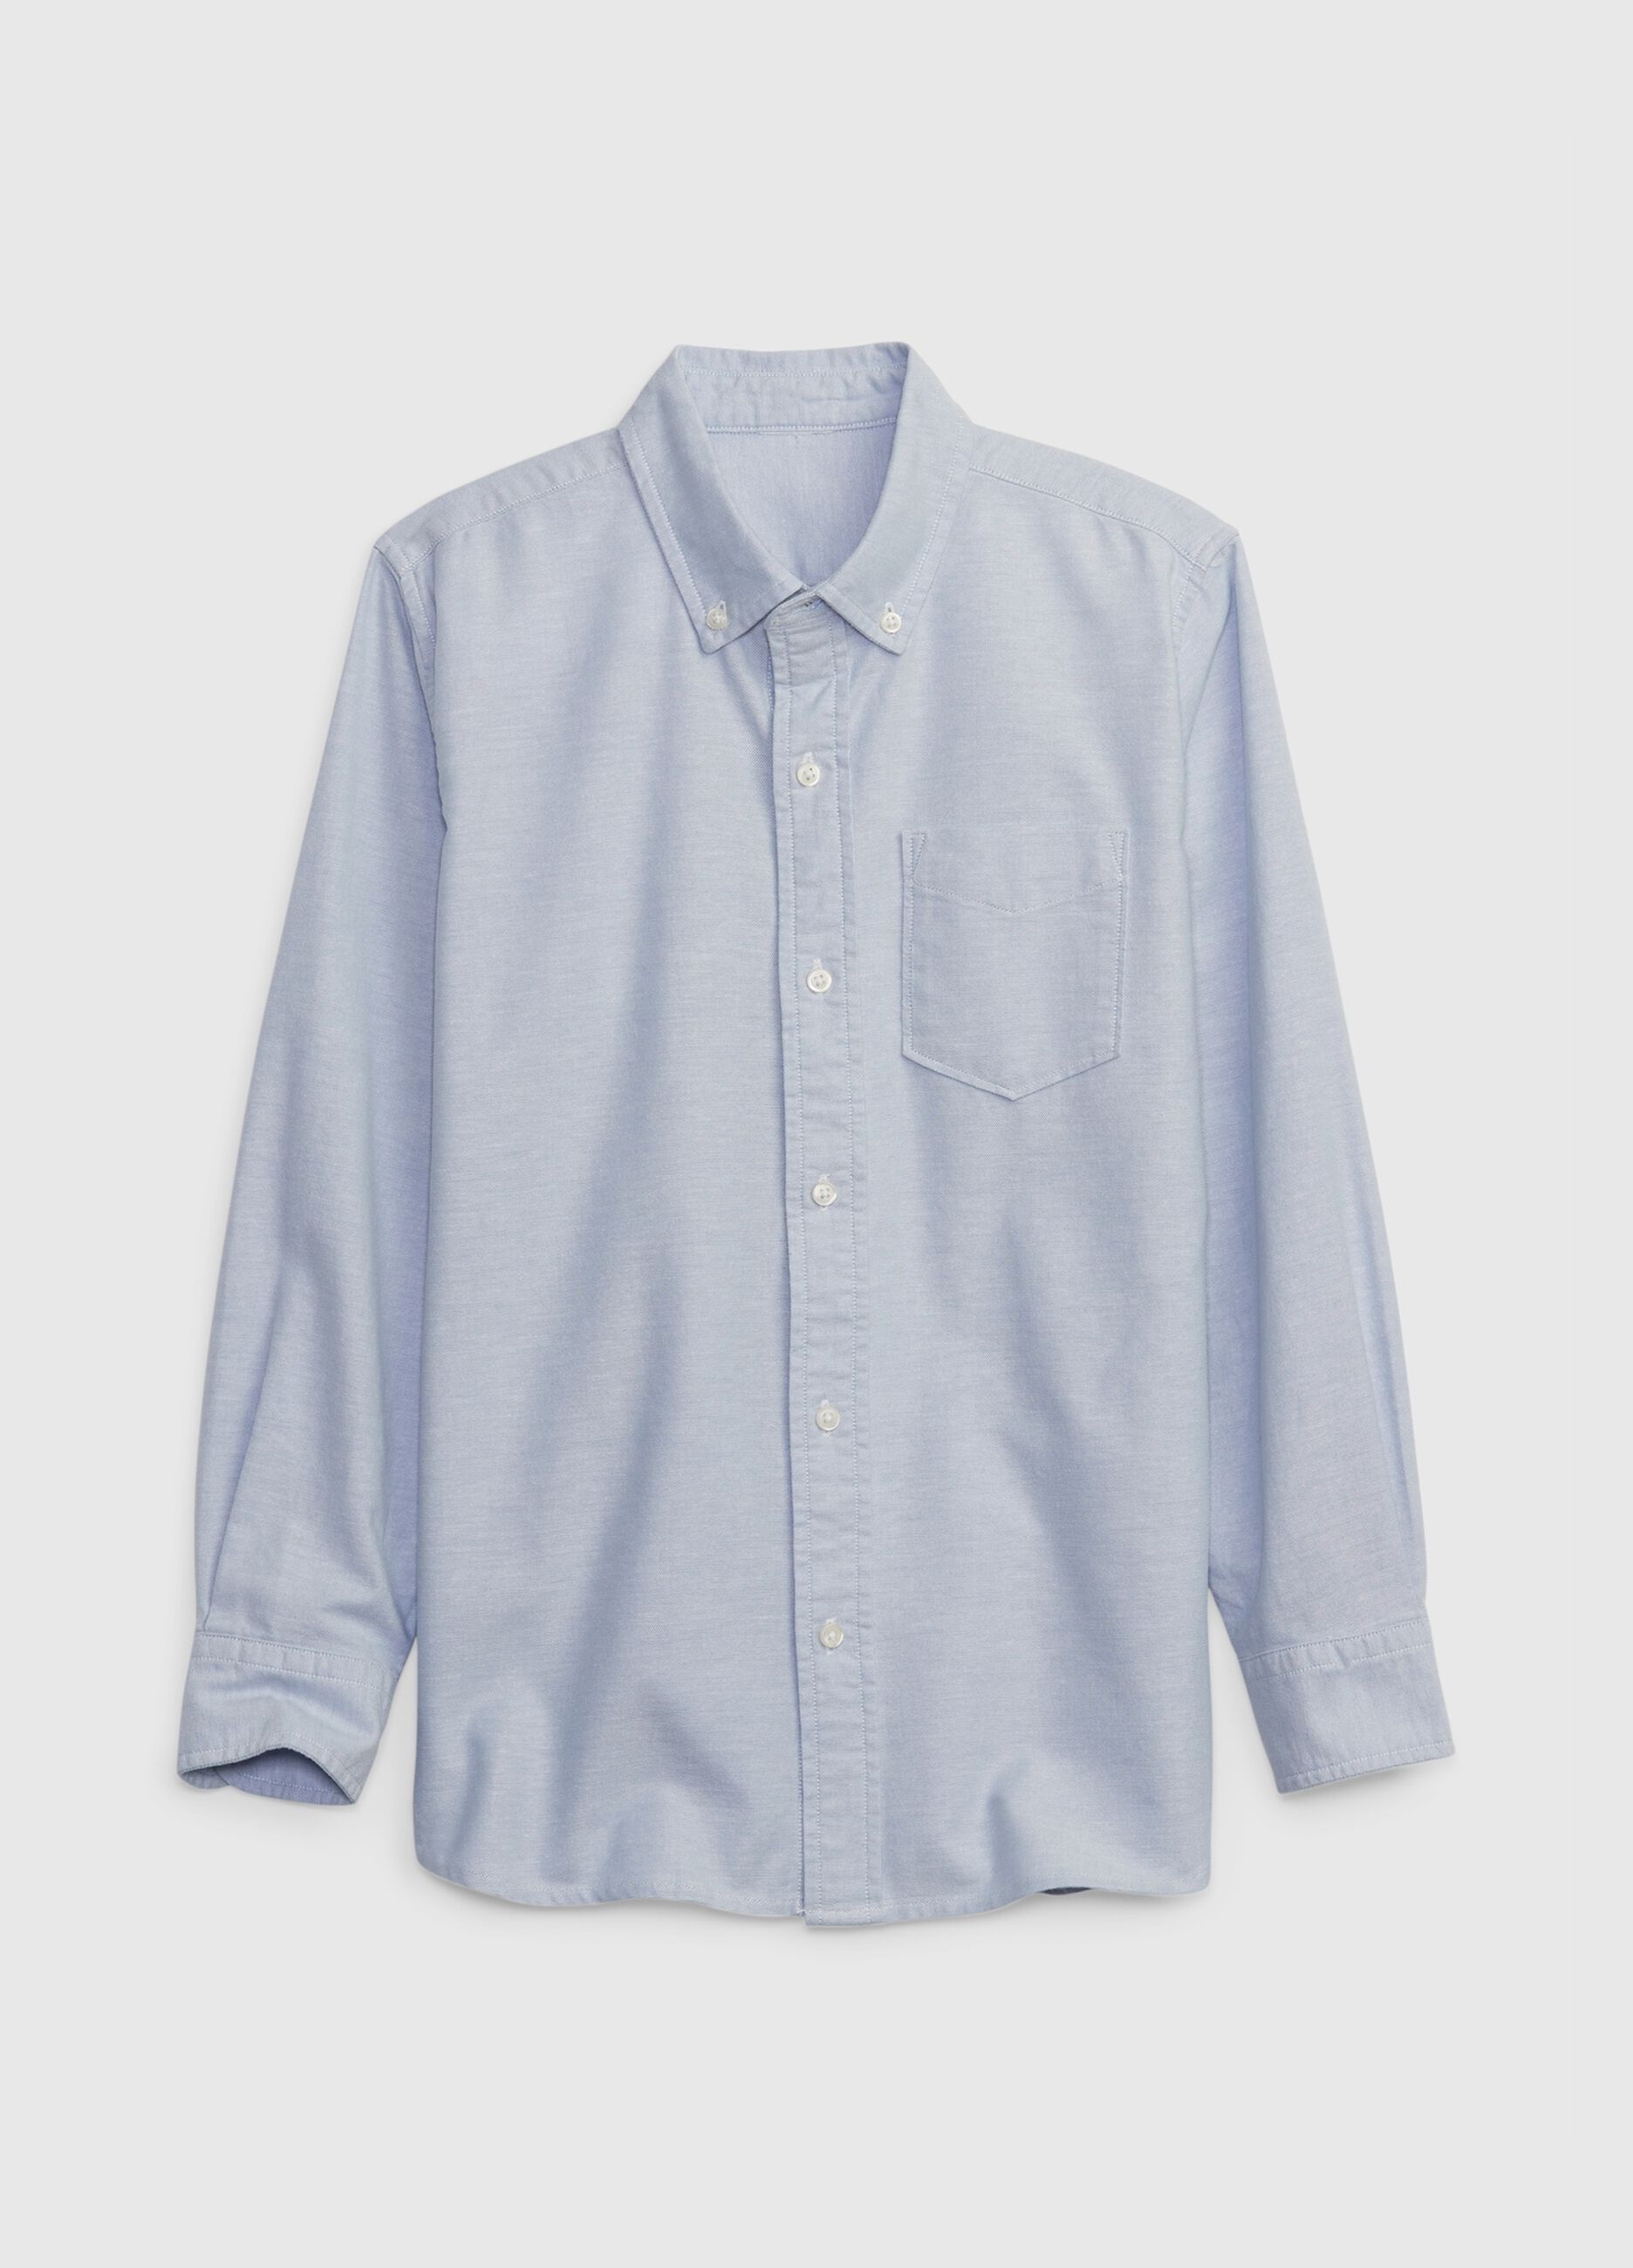 Oxford shirt with pocket